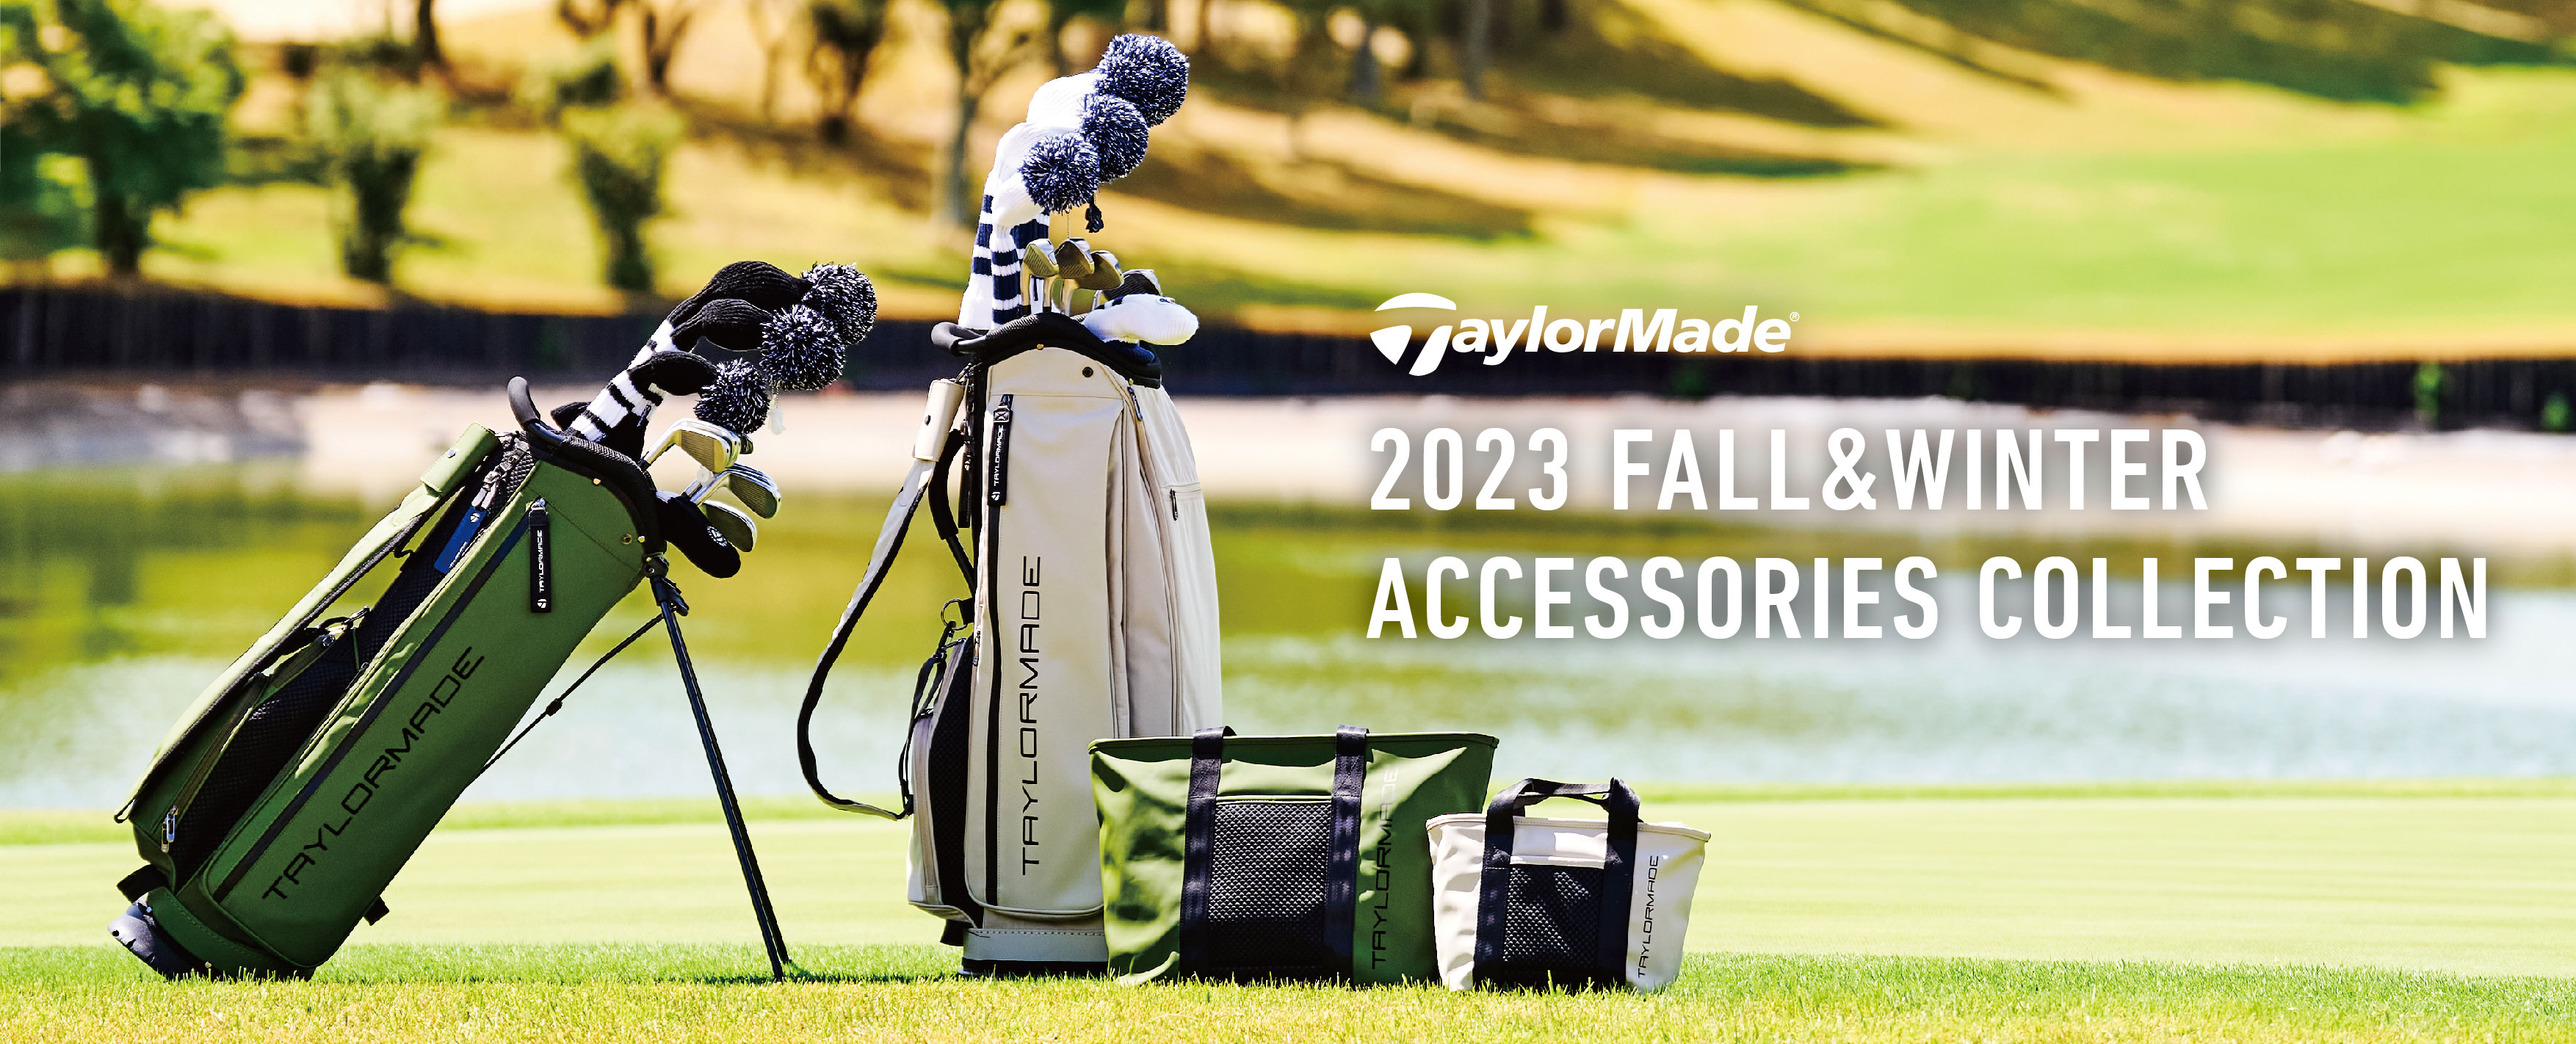 TaylorMade Golf | TaylorMade ACCESSORIES | 2023 FALL&WINTER